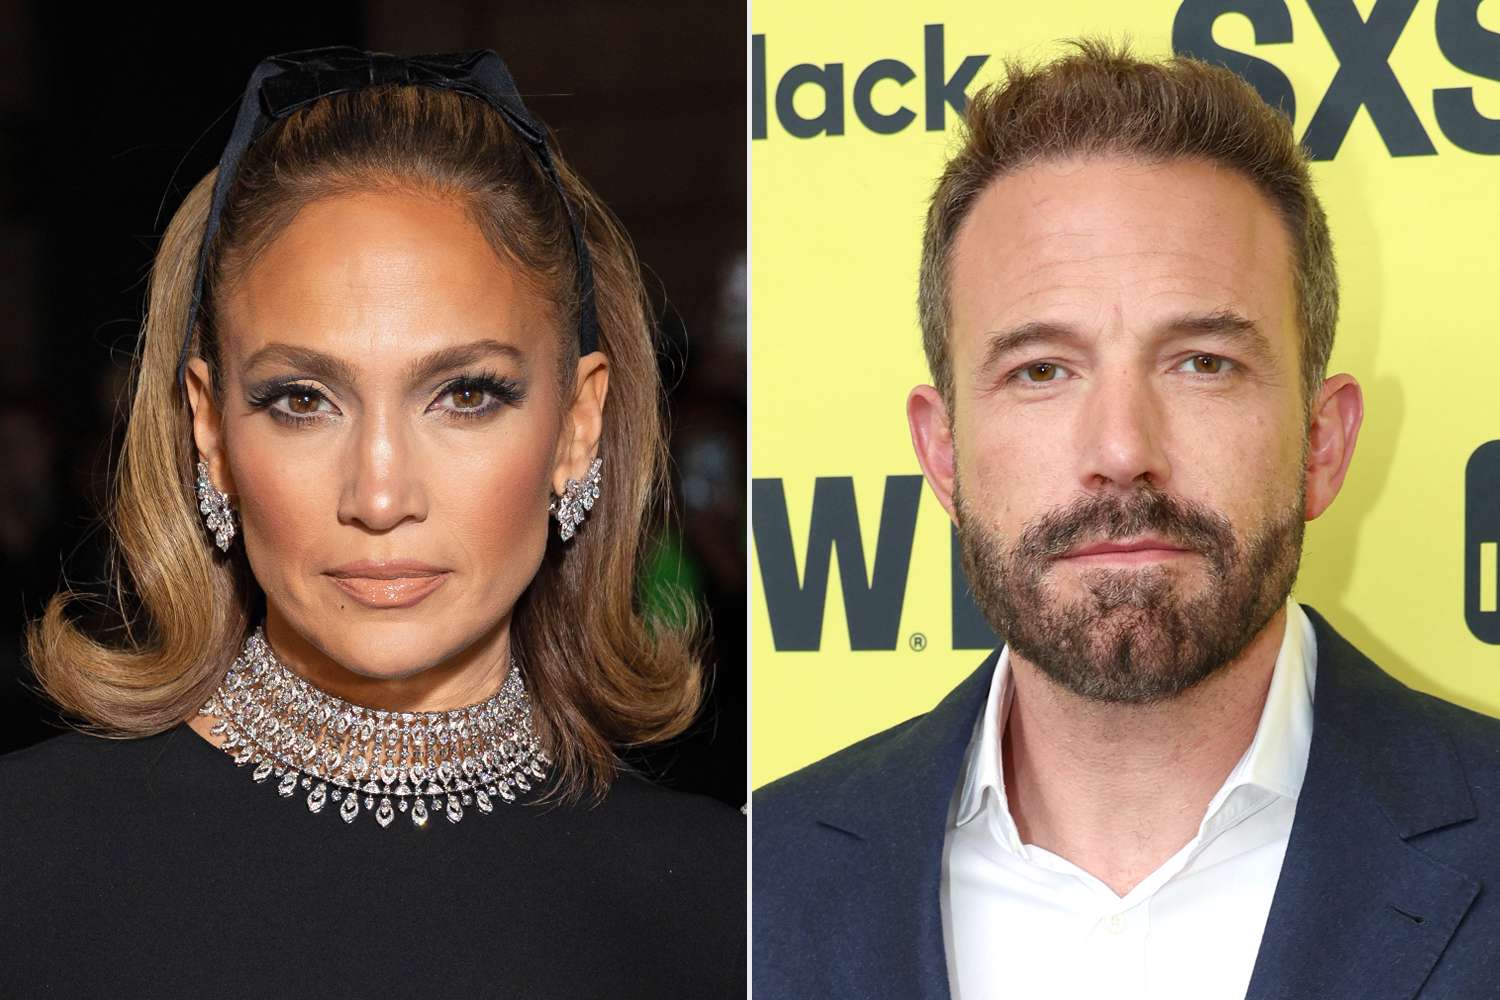 Jennifer Lopez 'Seemed Happy and Peaceful' Over Fourth of July in Hamptons, While Ben Affleck Was in L.A. (Exclusive Source)